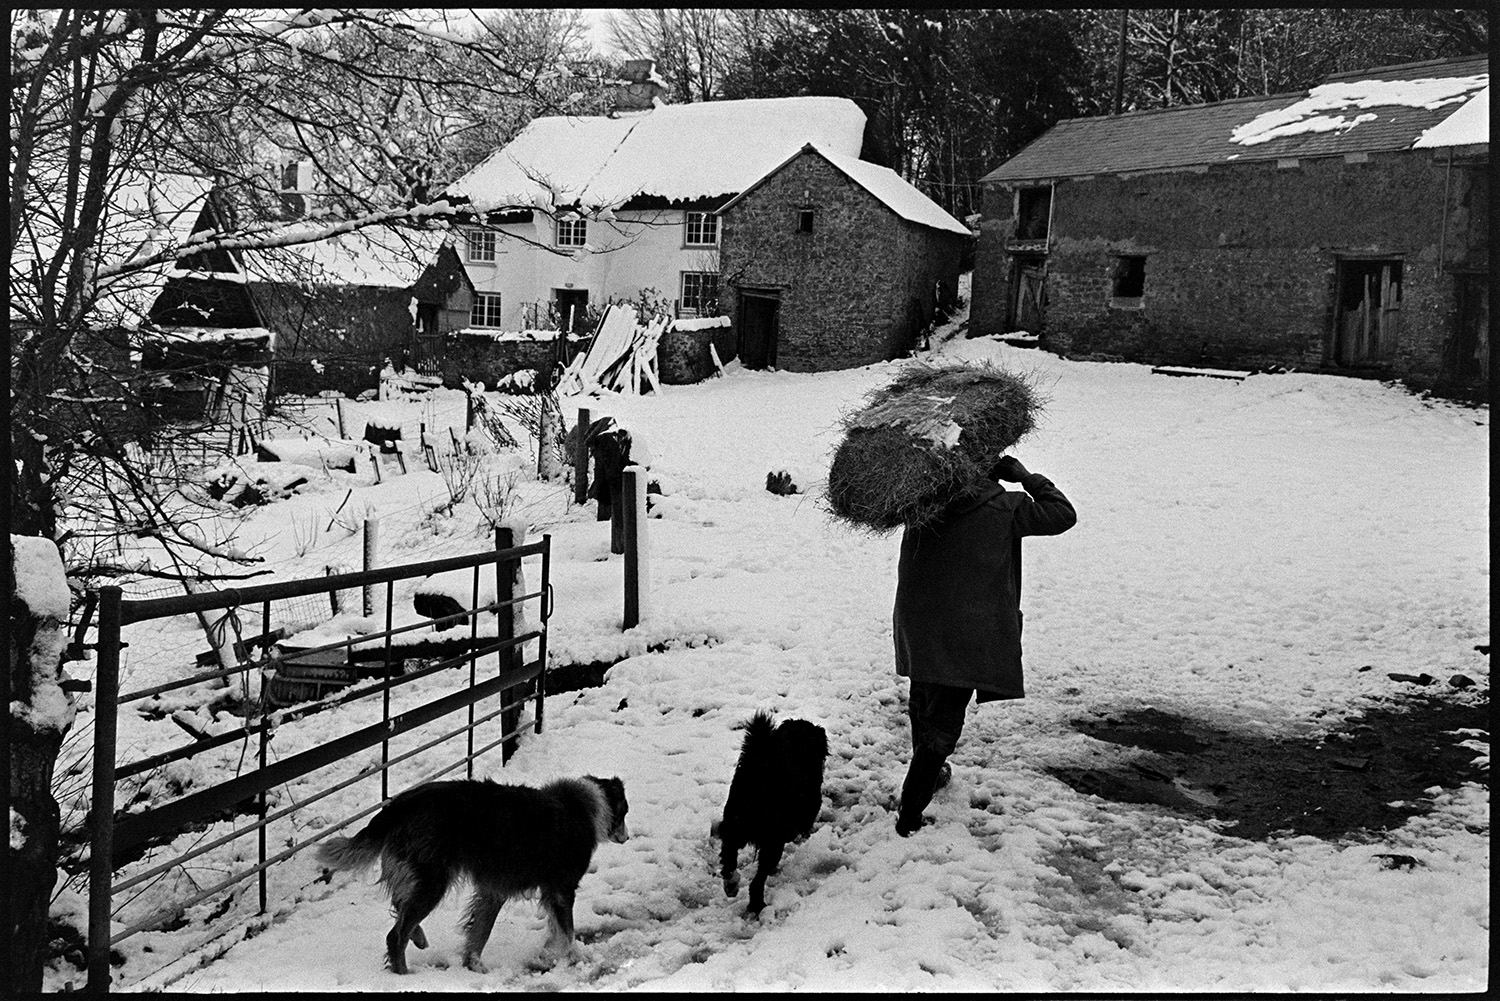 Farm under snow, farmer taking hay to cattle with dogs. 
[George Ayre carrying a hay bale on his back to take to cattle. He is walking through the snow covered farmyard at Ashwell, Dolton with two dogs. The thatched farmhouse and barns are covered with snow.]